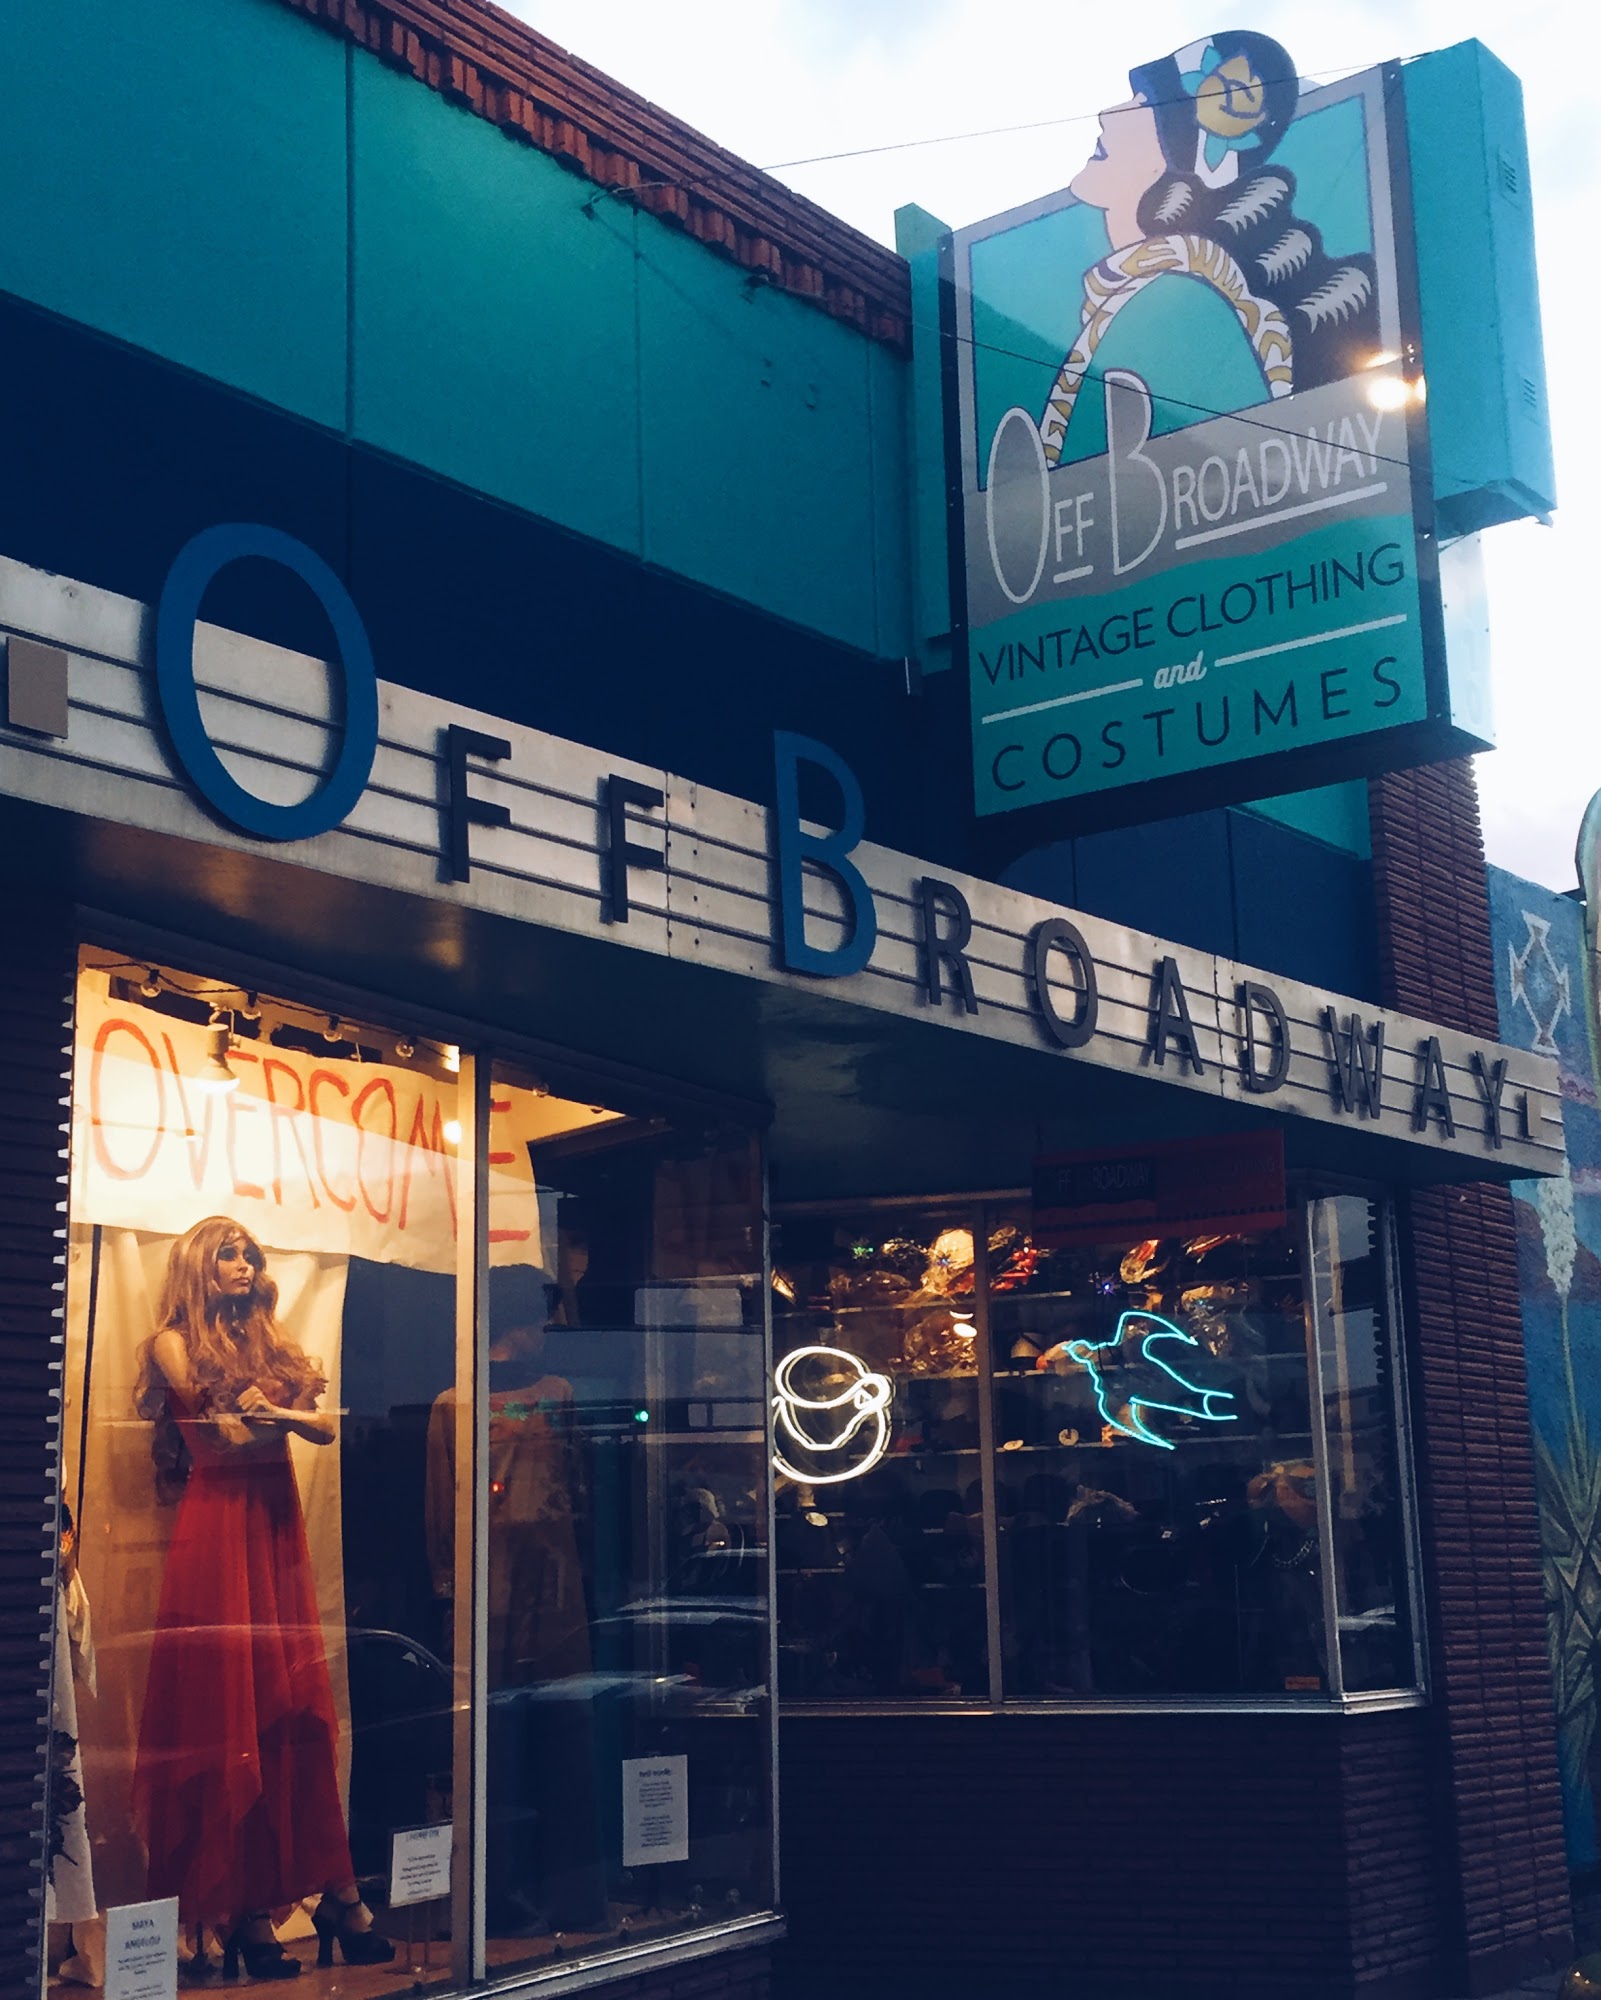 Off Broadway Vintage Clothing and Costumes